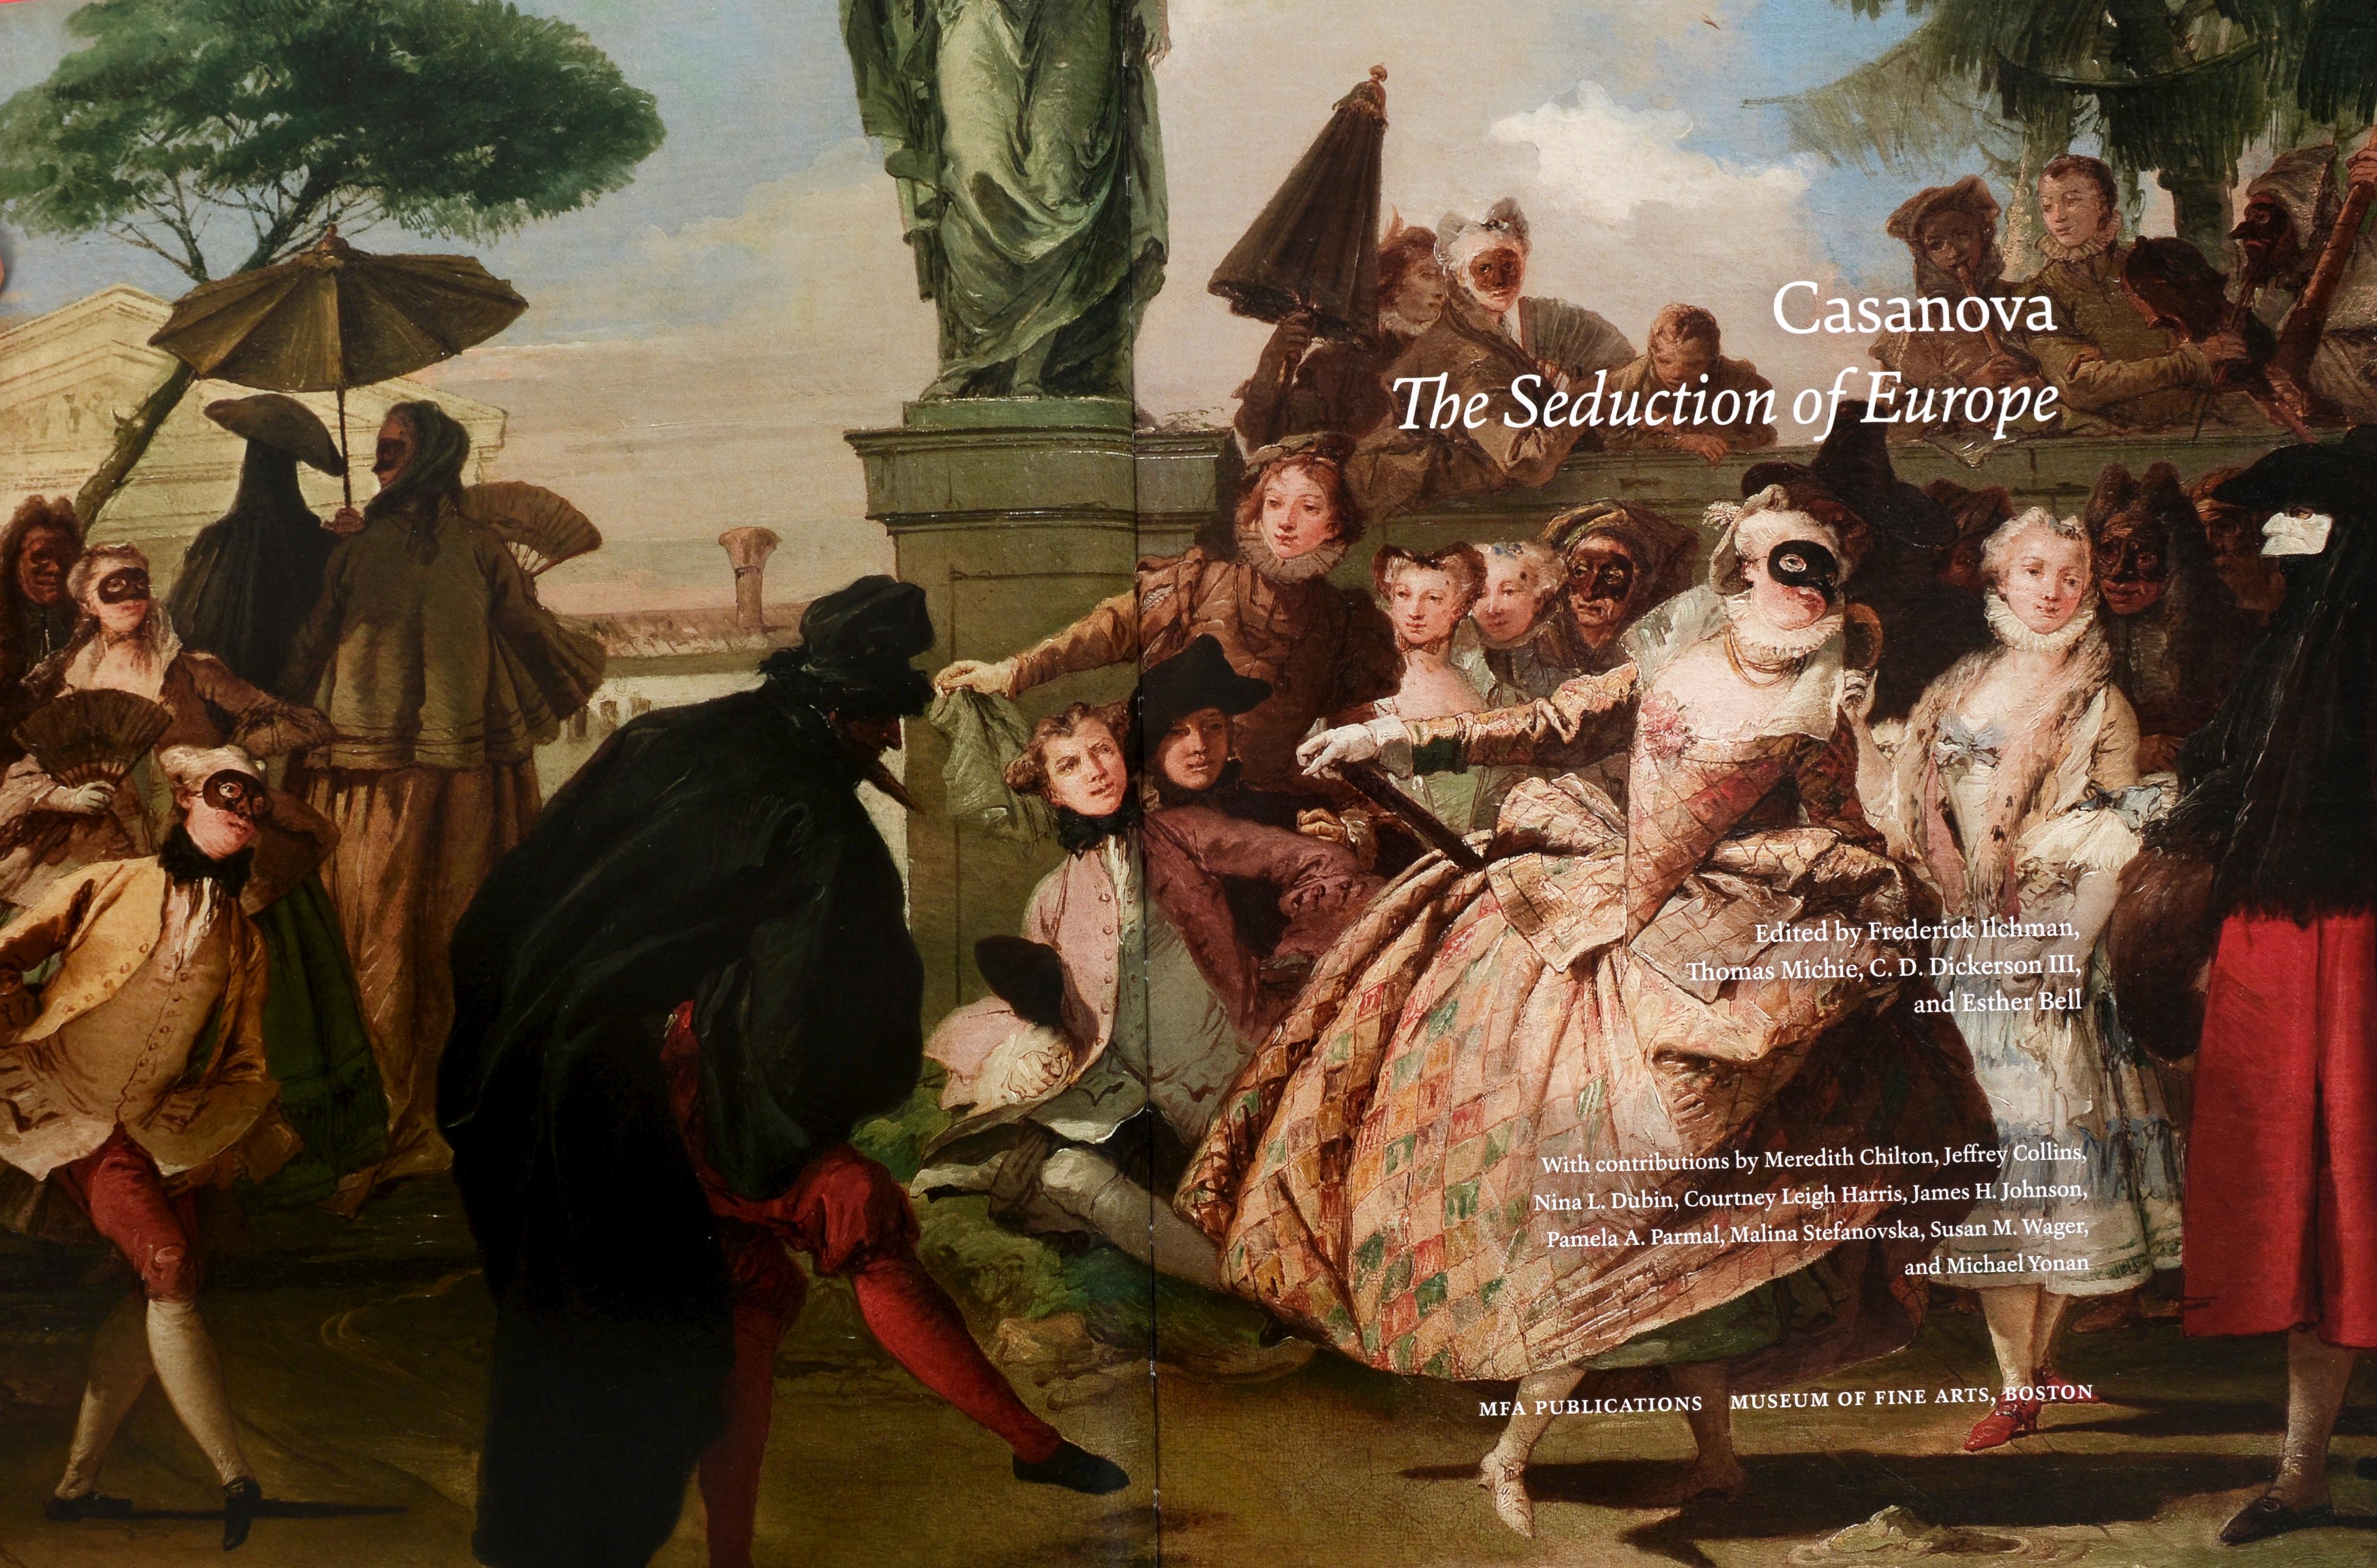 Casanovia; Seduction of Europe, by Frederick Ilchman. MFA Publications, Museum of fine Arts, Boston, 2017. 1st Ed hardcover with dust jacket. From the salon to the boudoir: the world of Casanova as seen through the art of his era. In 18th-c Europe,